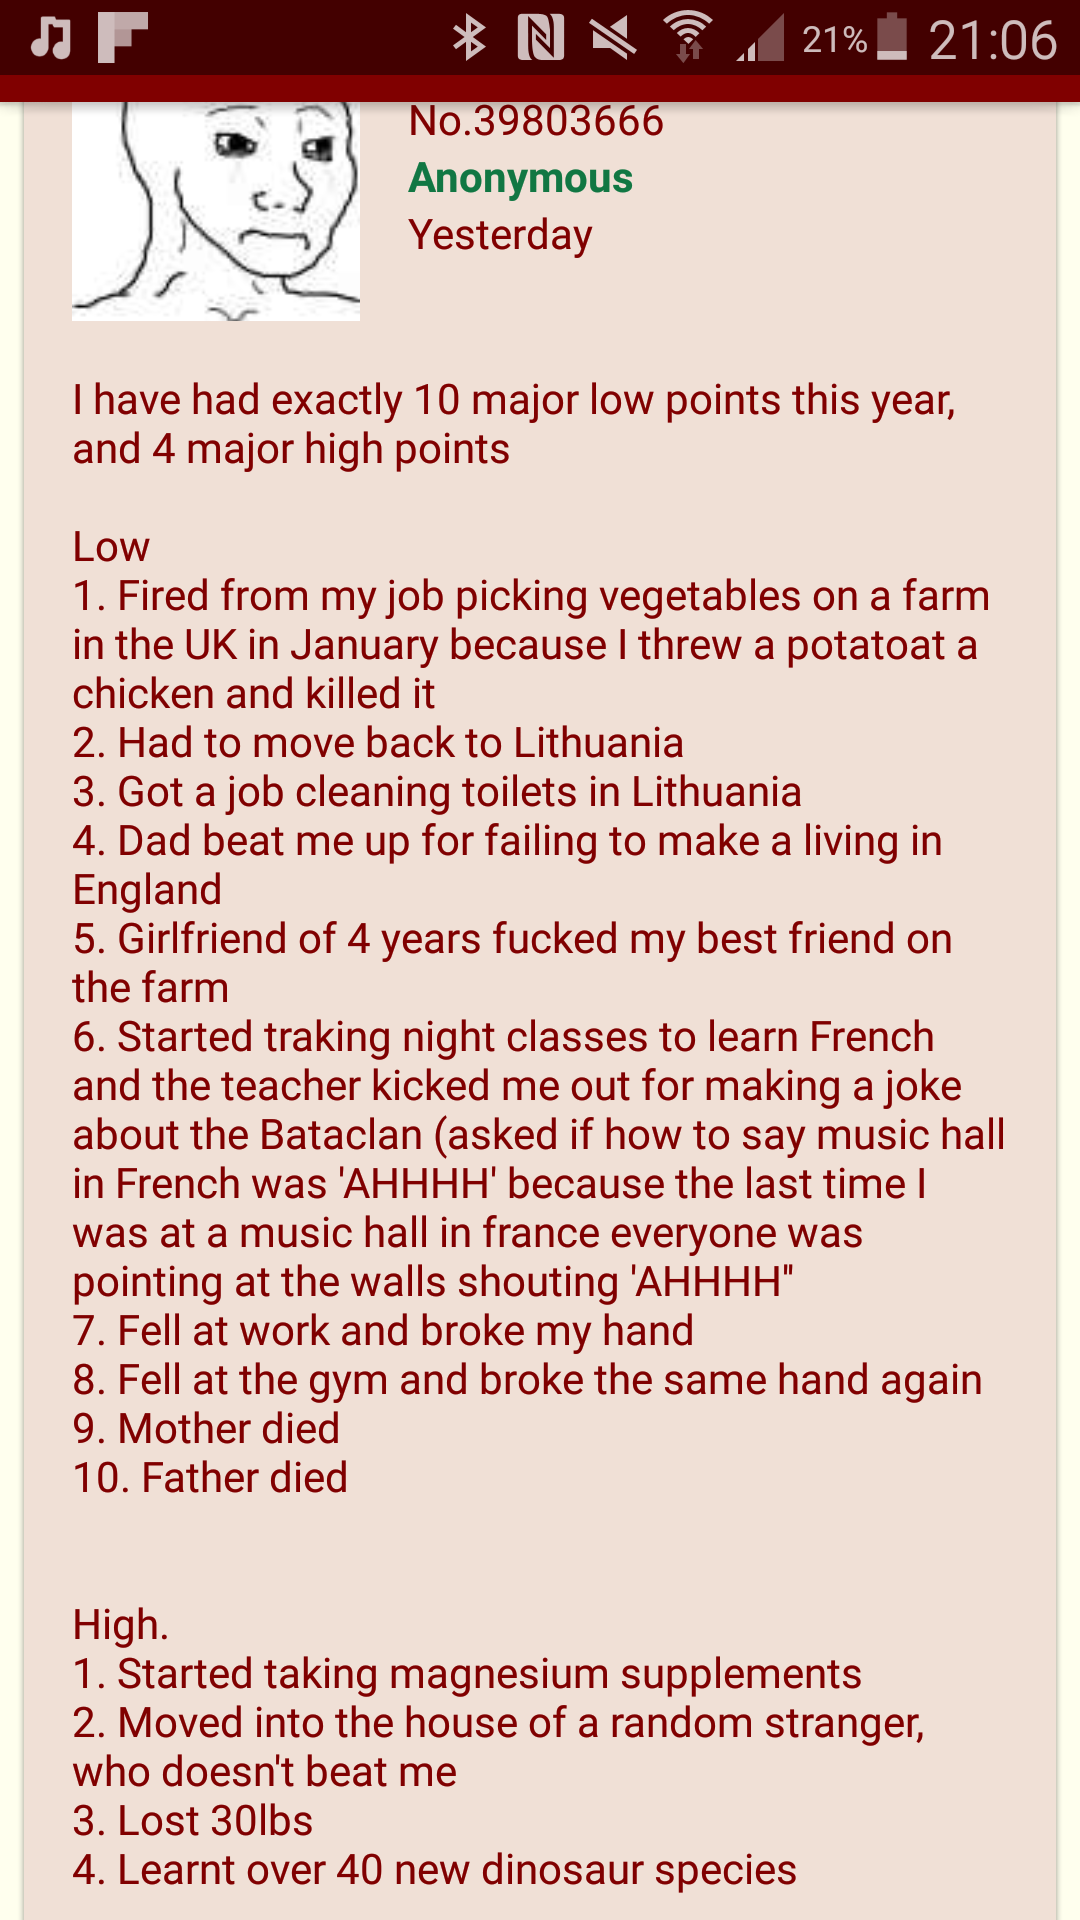 /fit/izen on his 2016. What's yours?